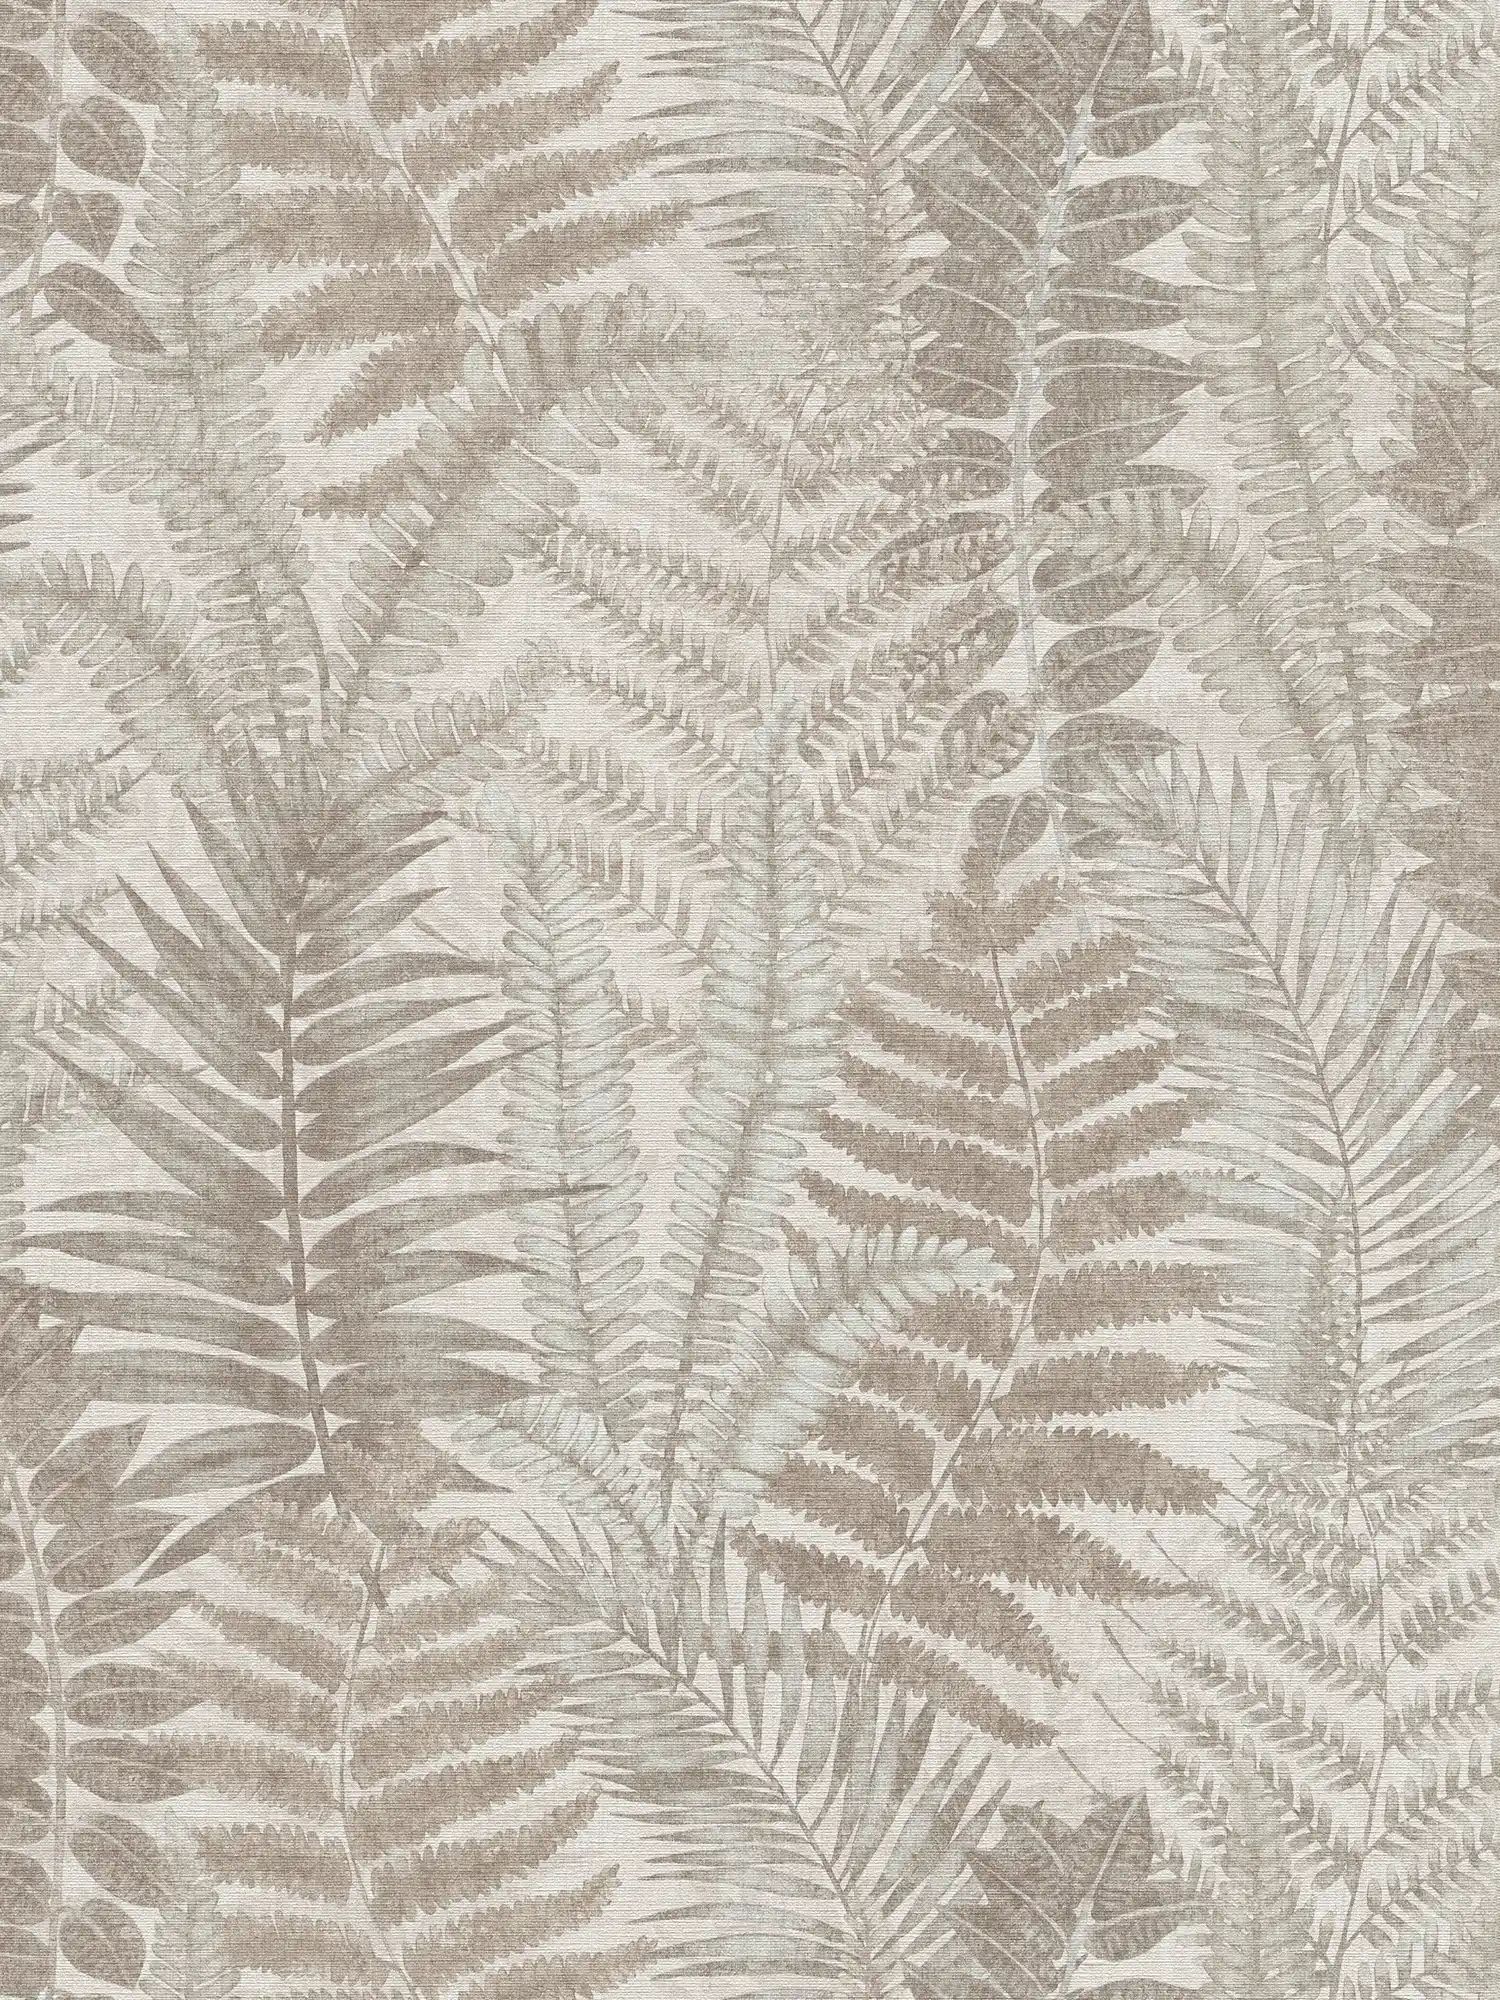 Floral non-woven wallpaper with fern leaves lightly textured, matt - grey, beige, taupe
